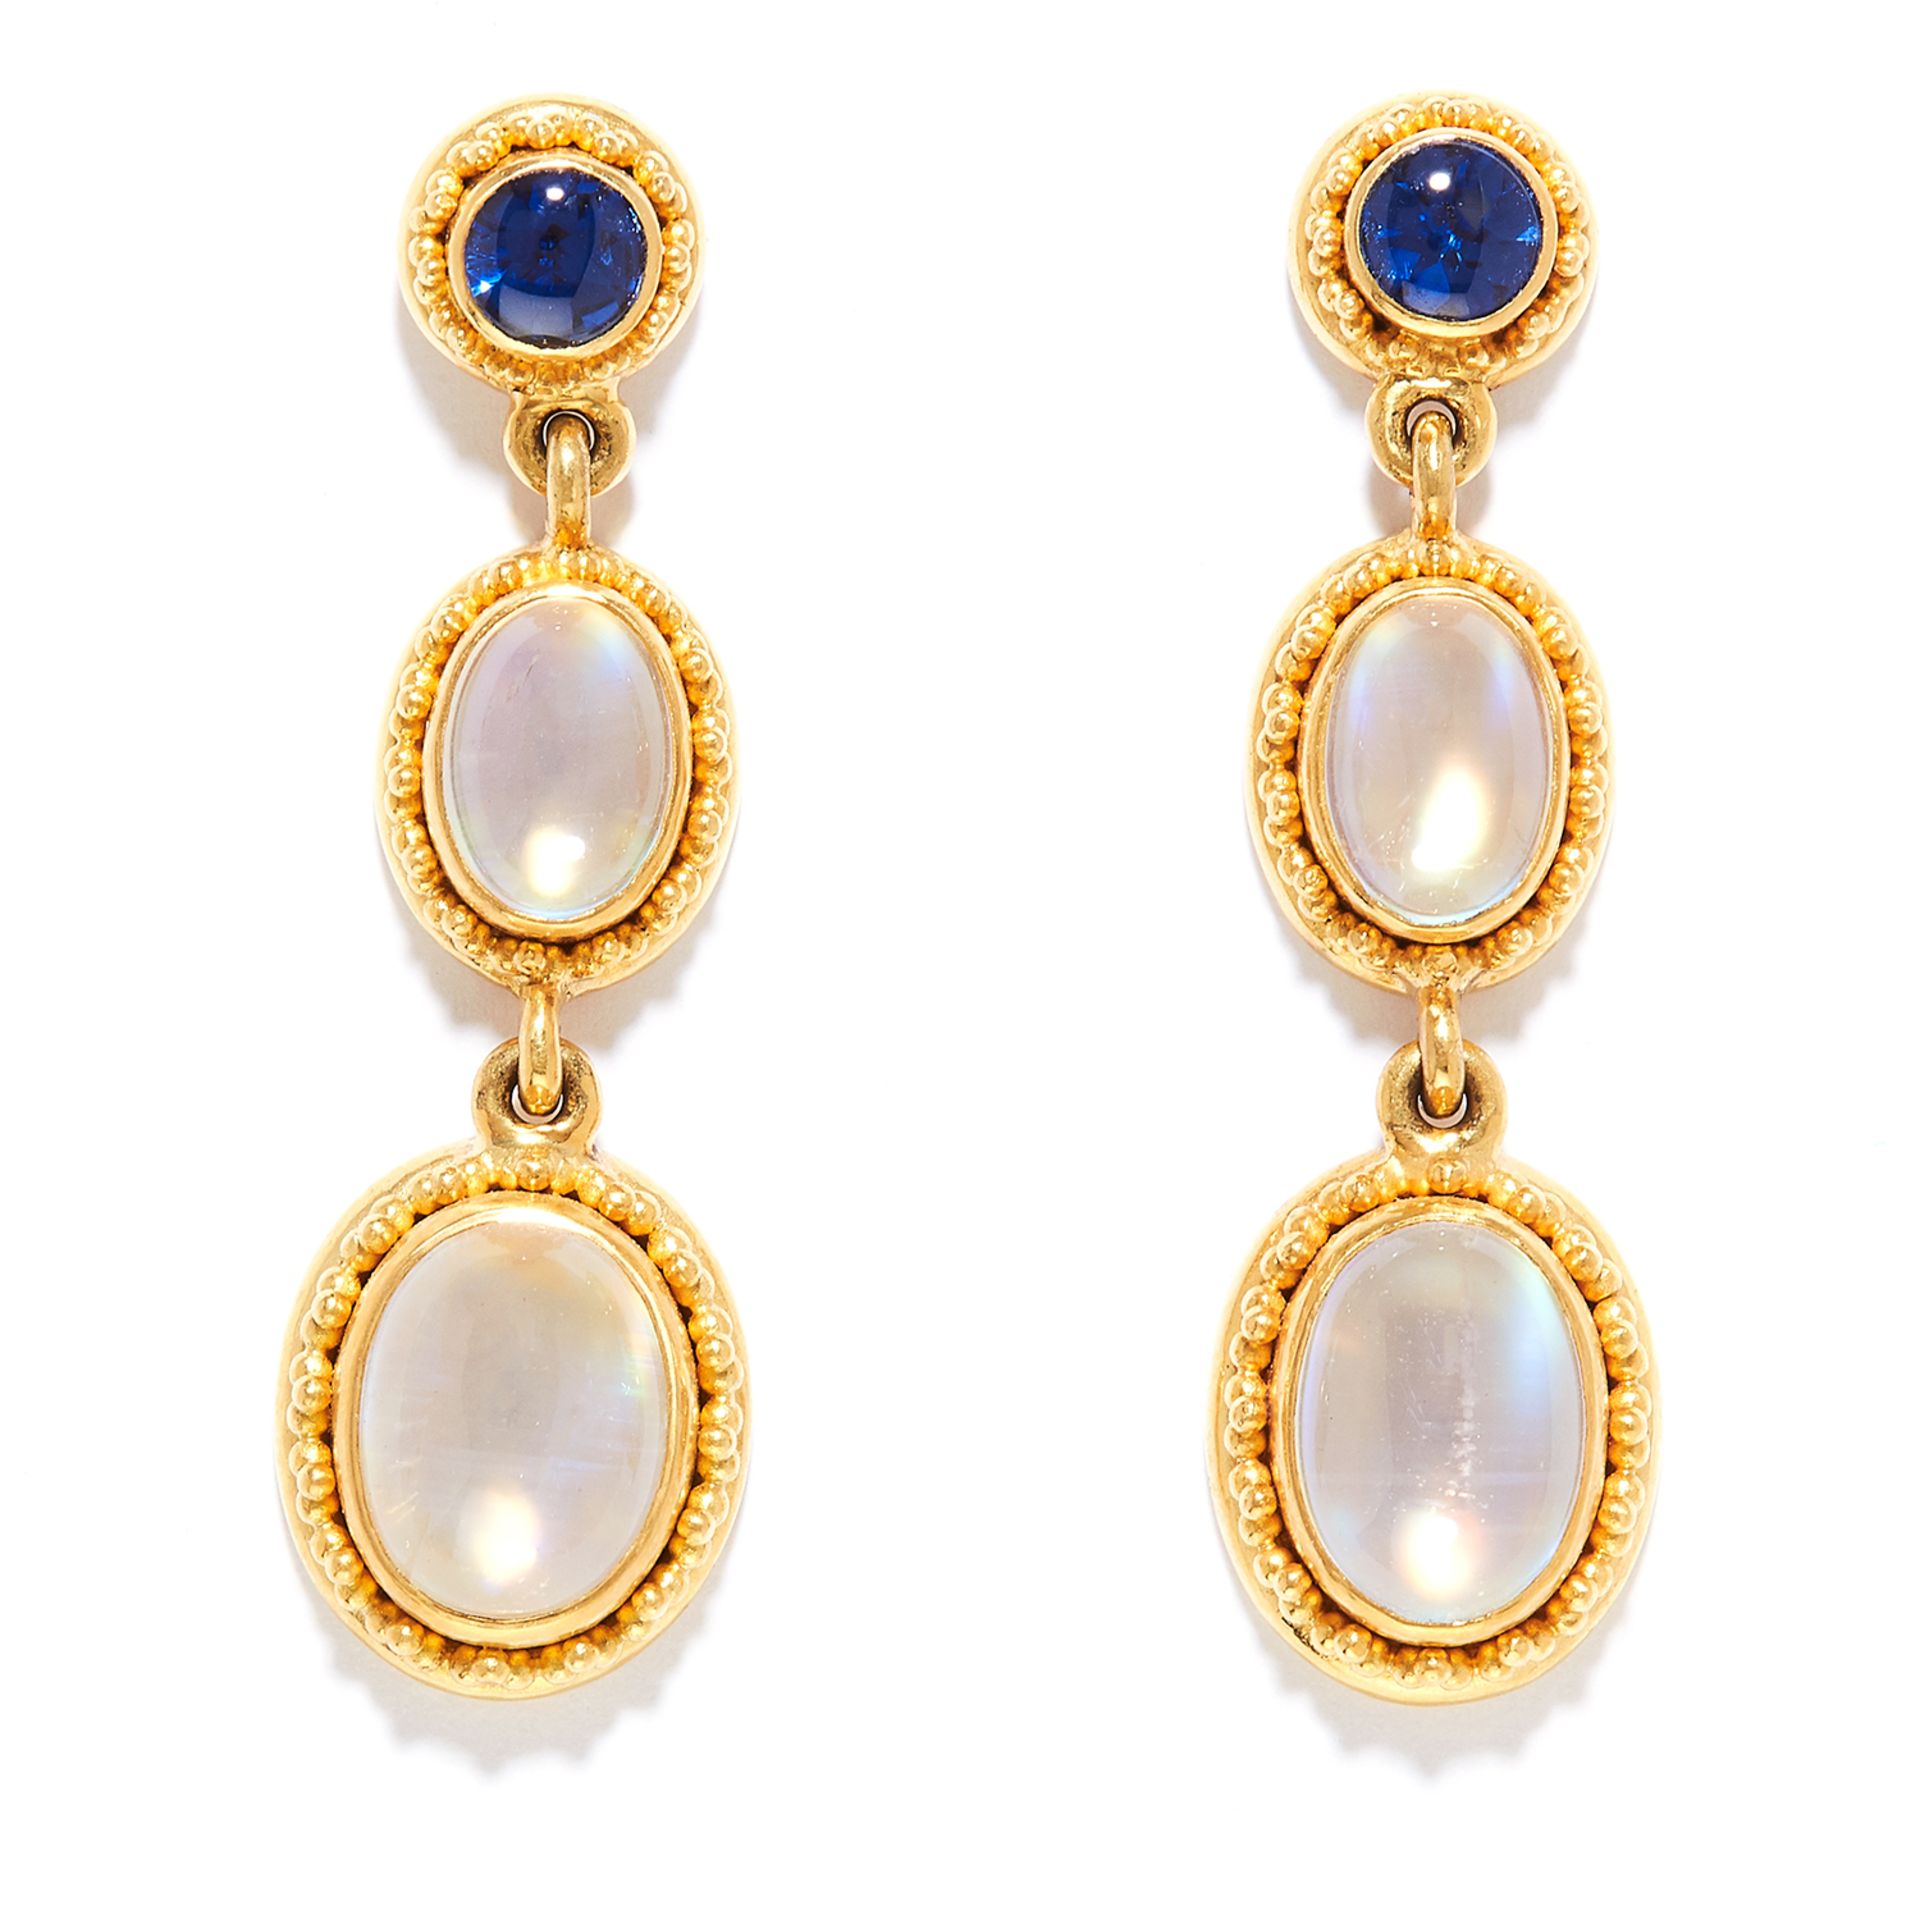 MOONSTONE AND SAPPHIRE DROP EARRINGS in 22ct yellow gold, the three articulated links set with